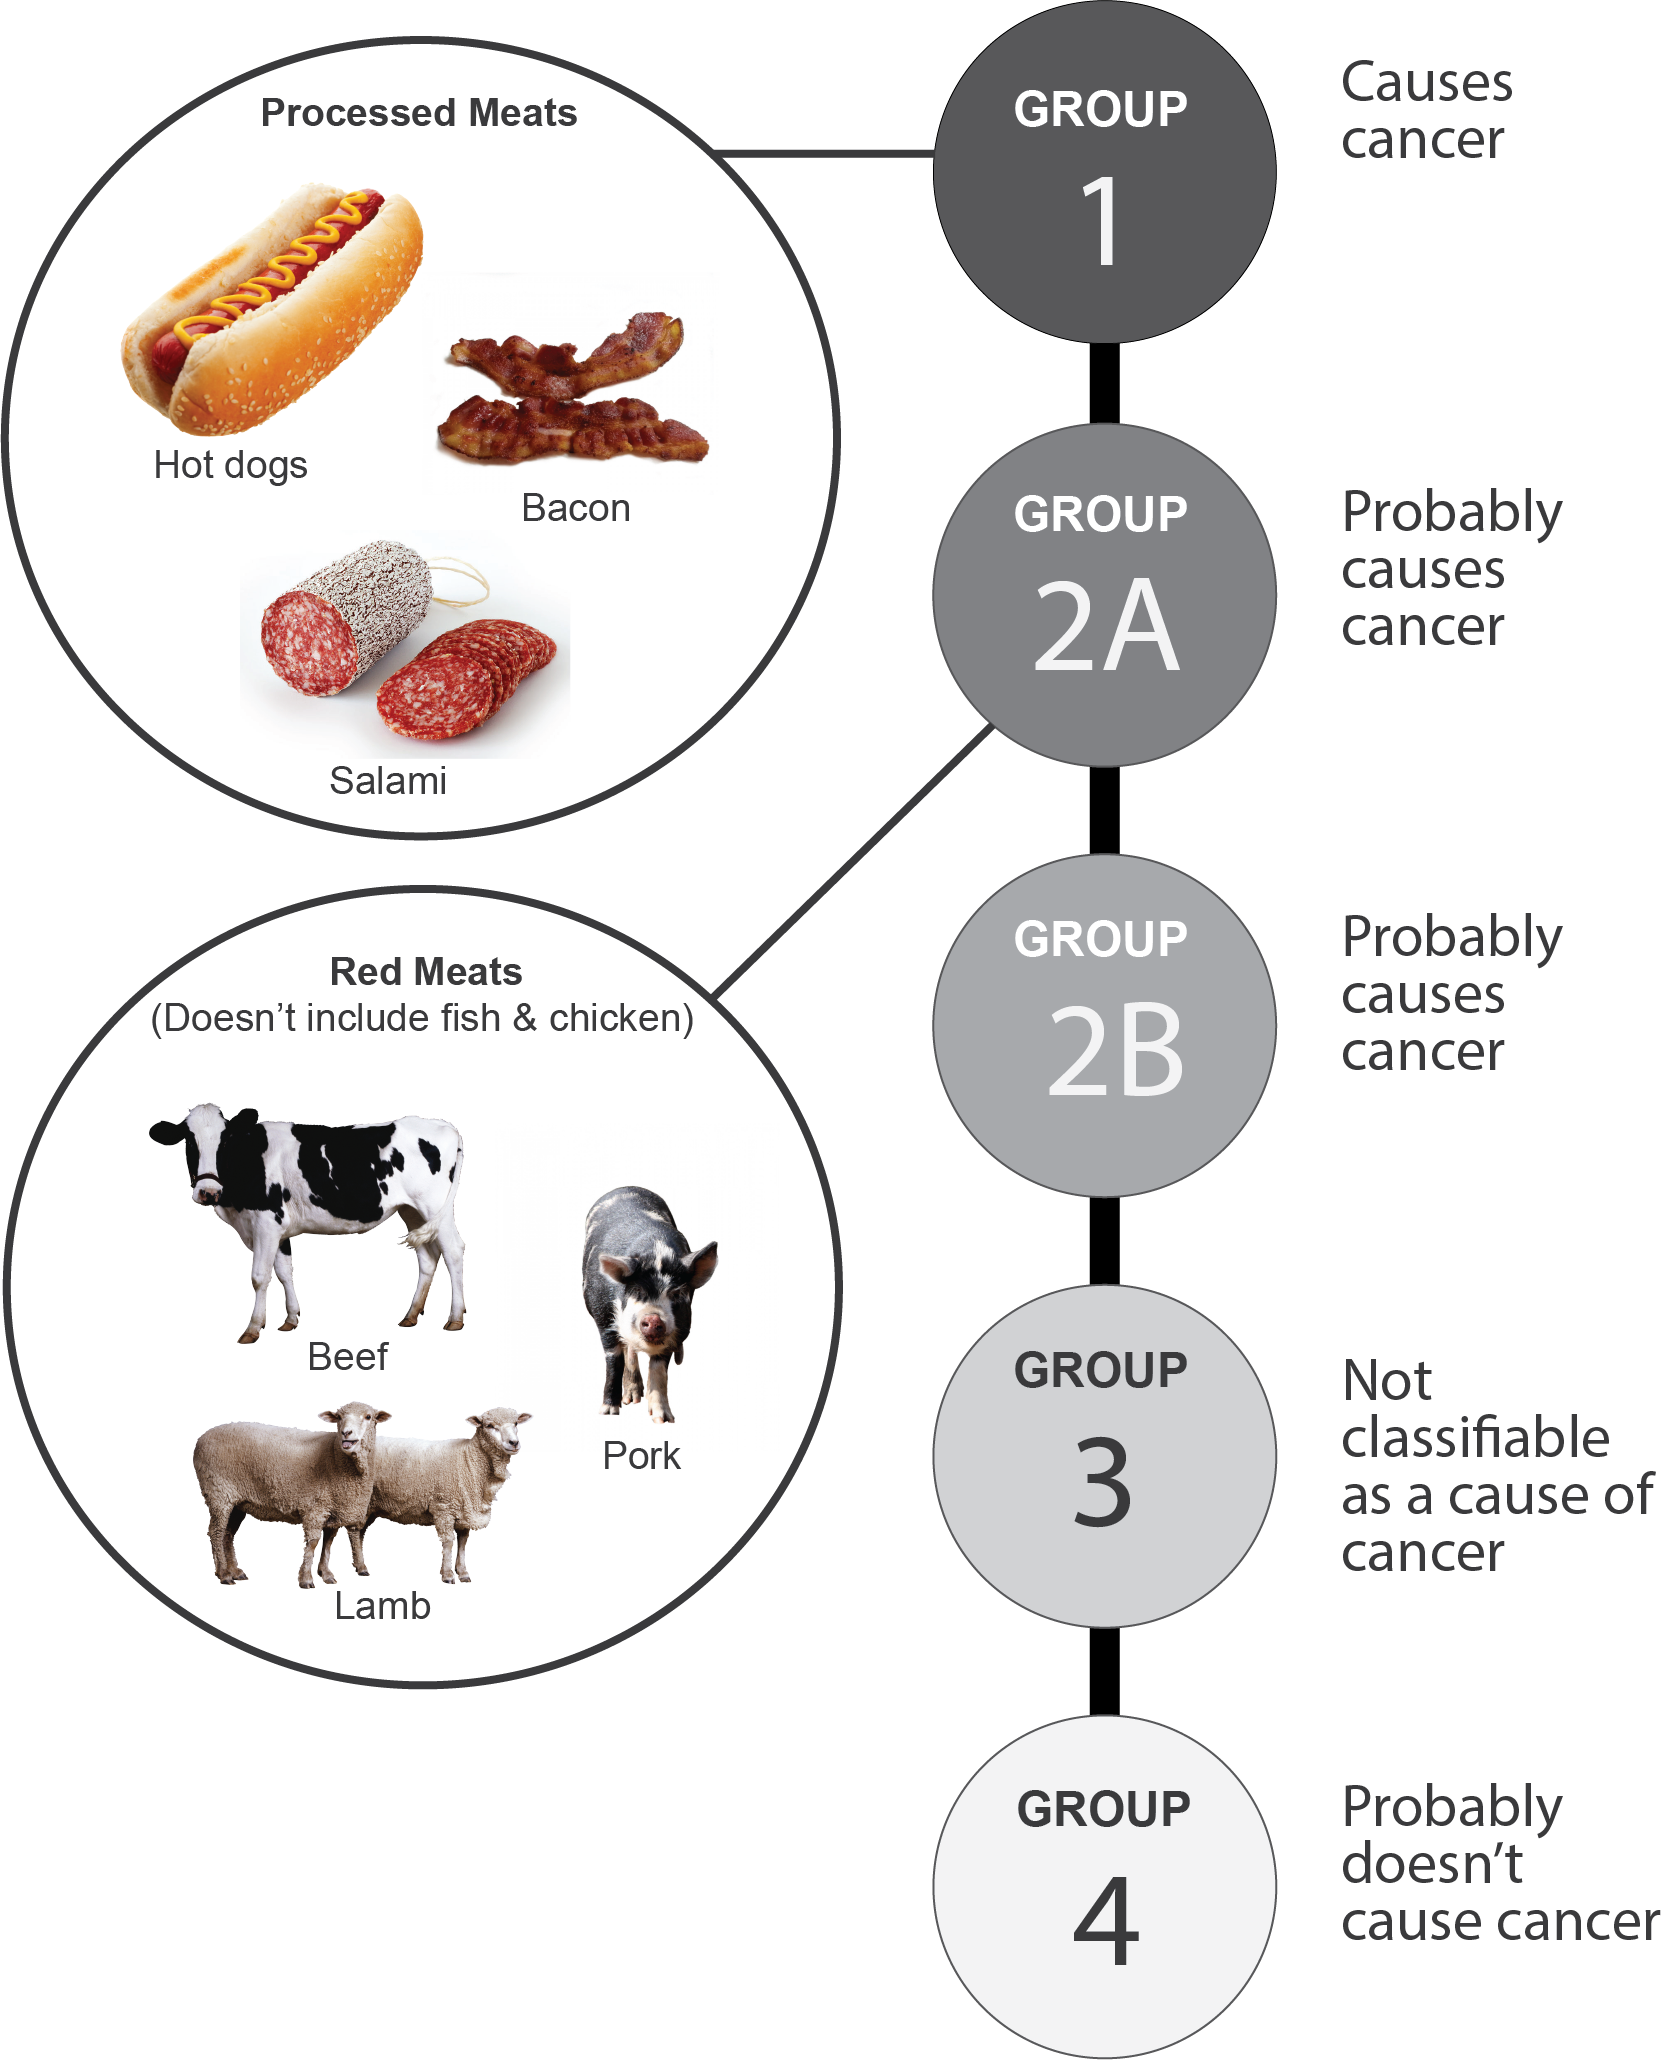 Consecutive circles outline categories of cancer risk with images of processed meats and red meat.